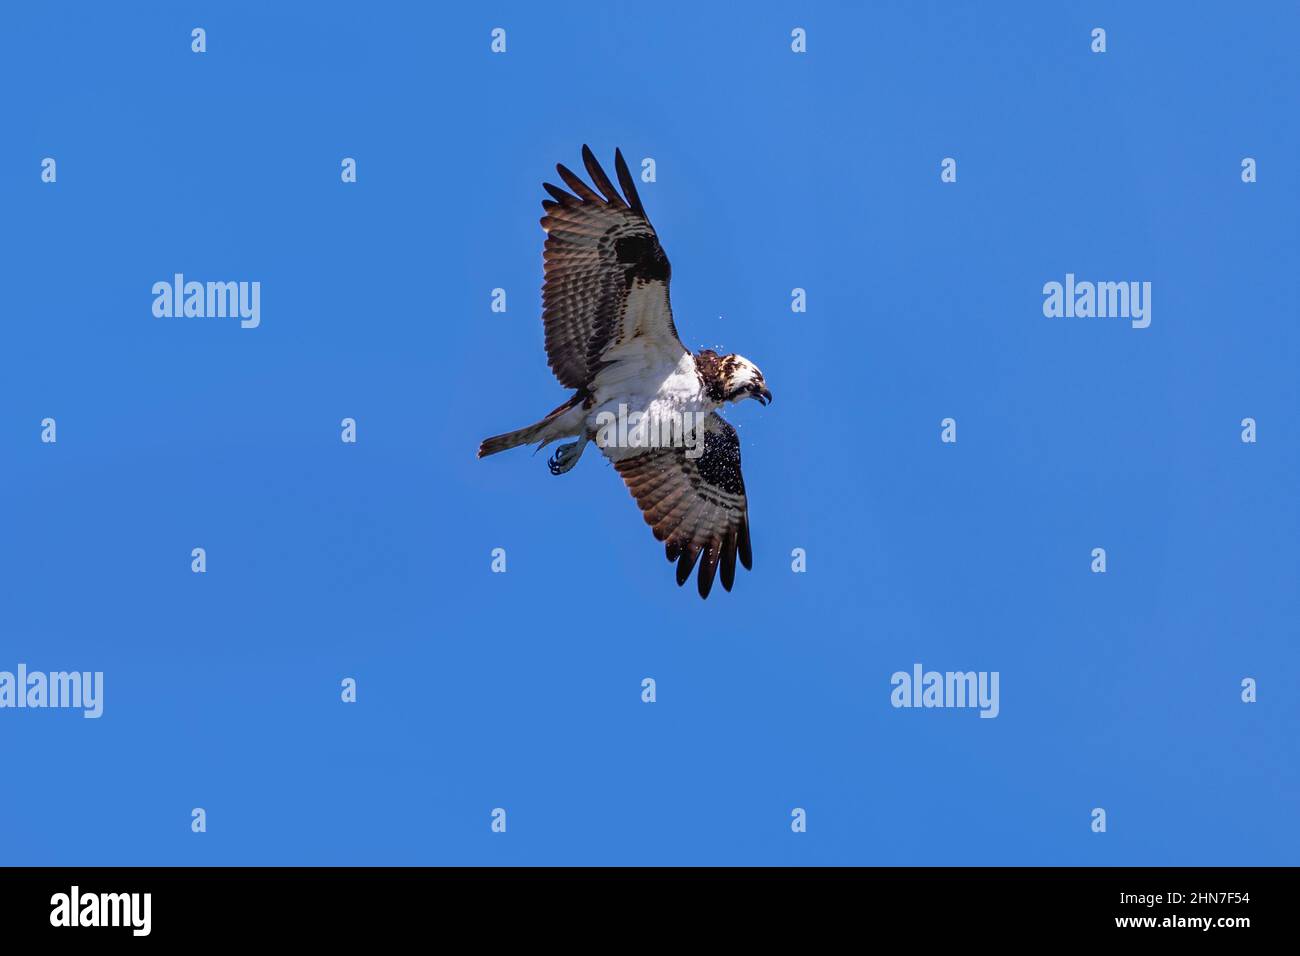 An Osprey shaking water off its feathers like a wet dog while hovering in mid flight against a blue sky. Stock Photo